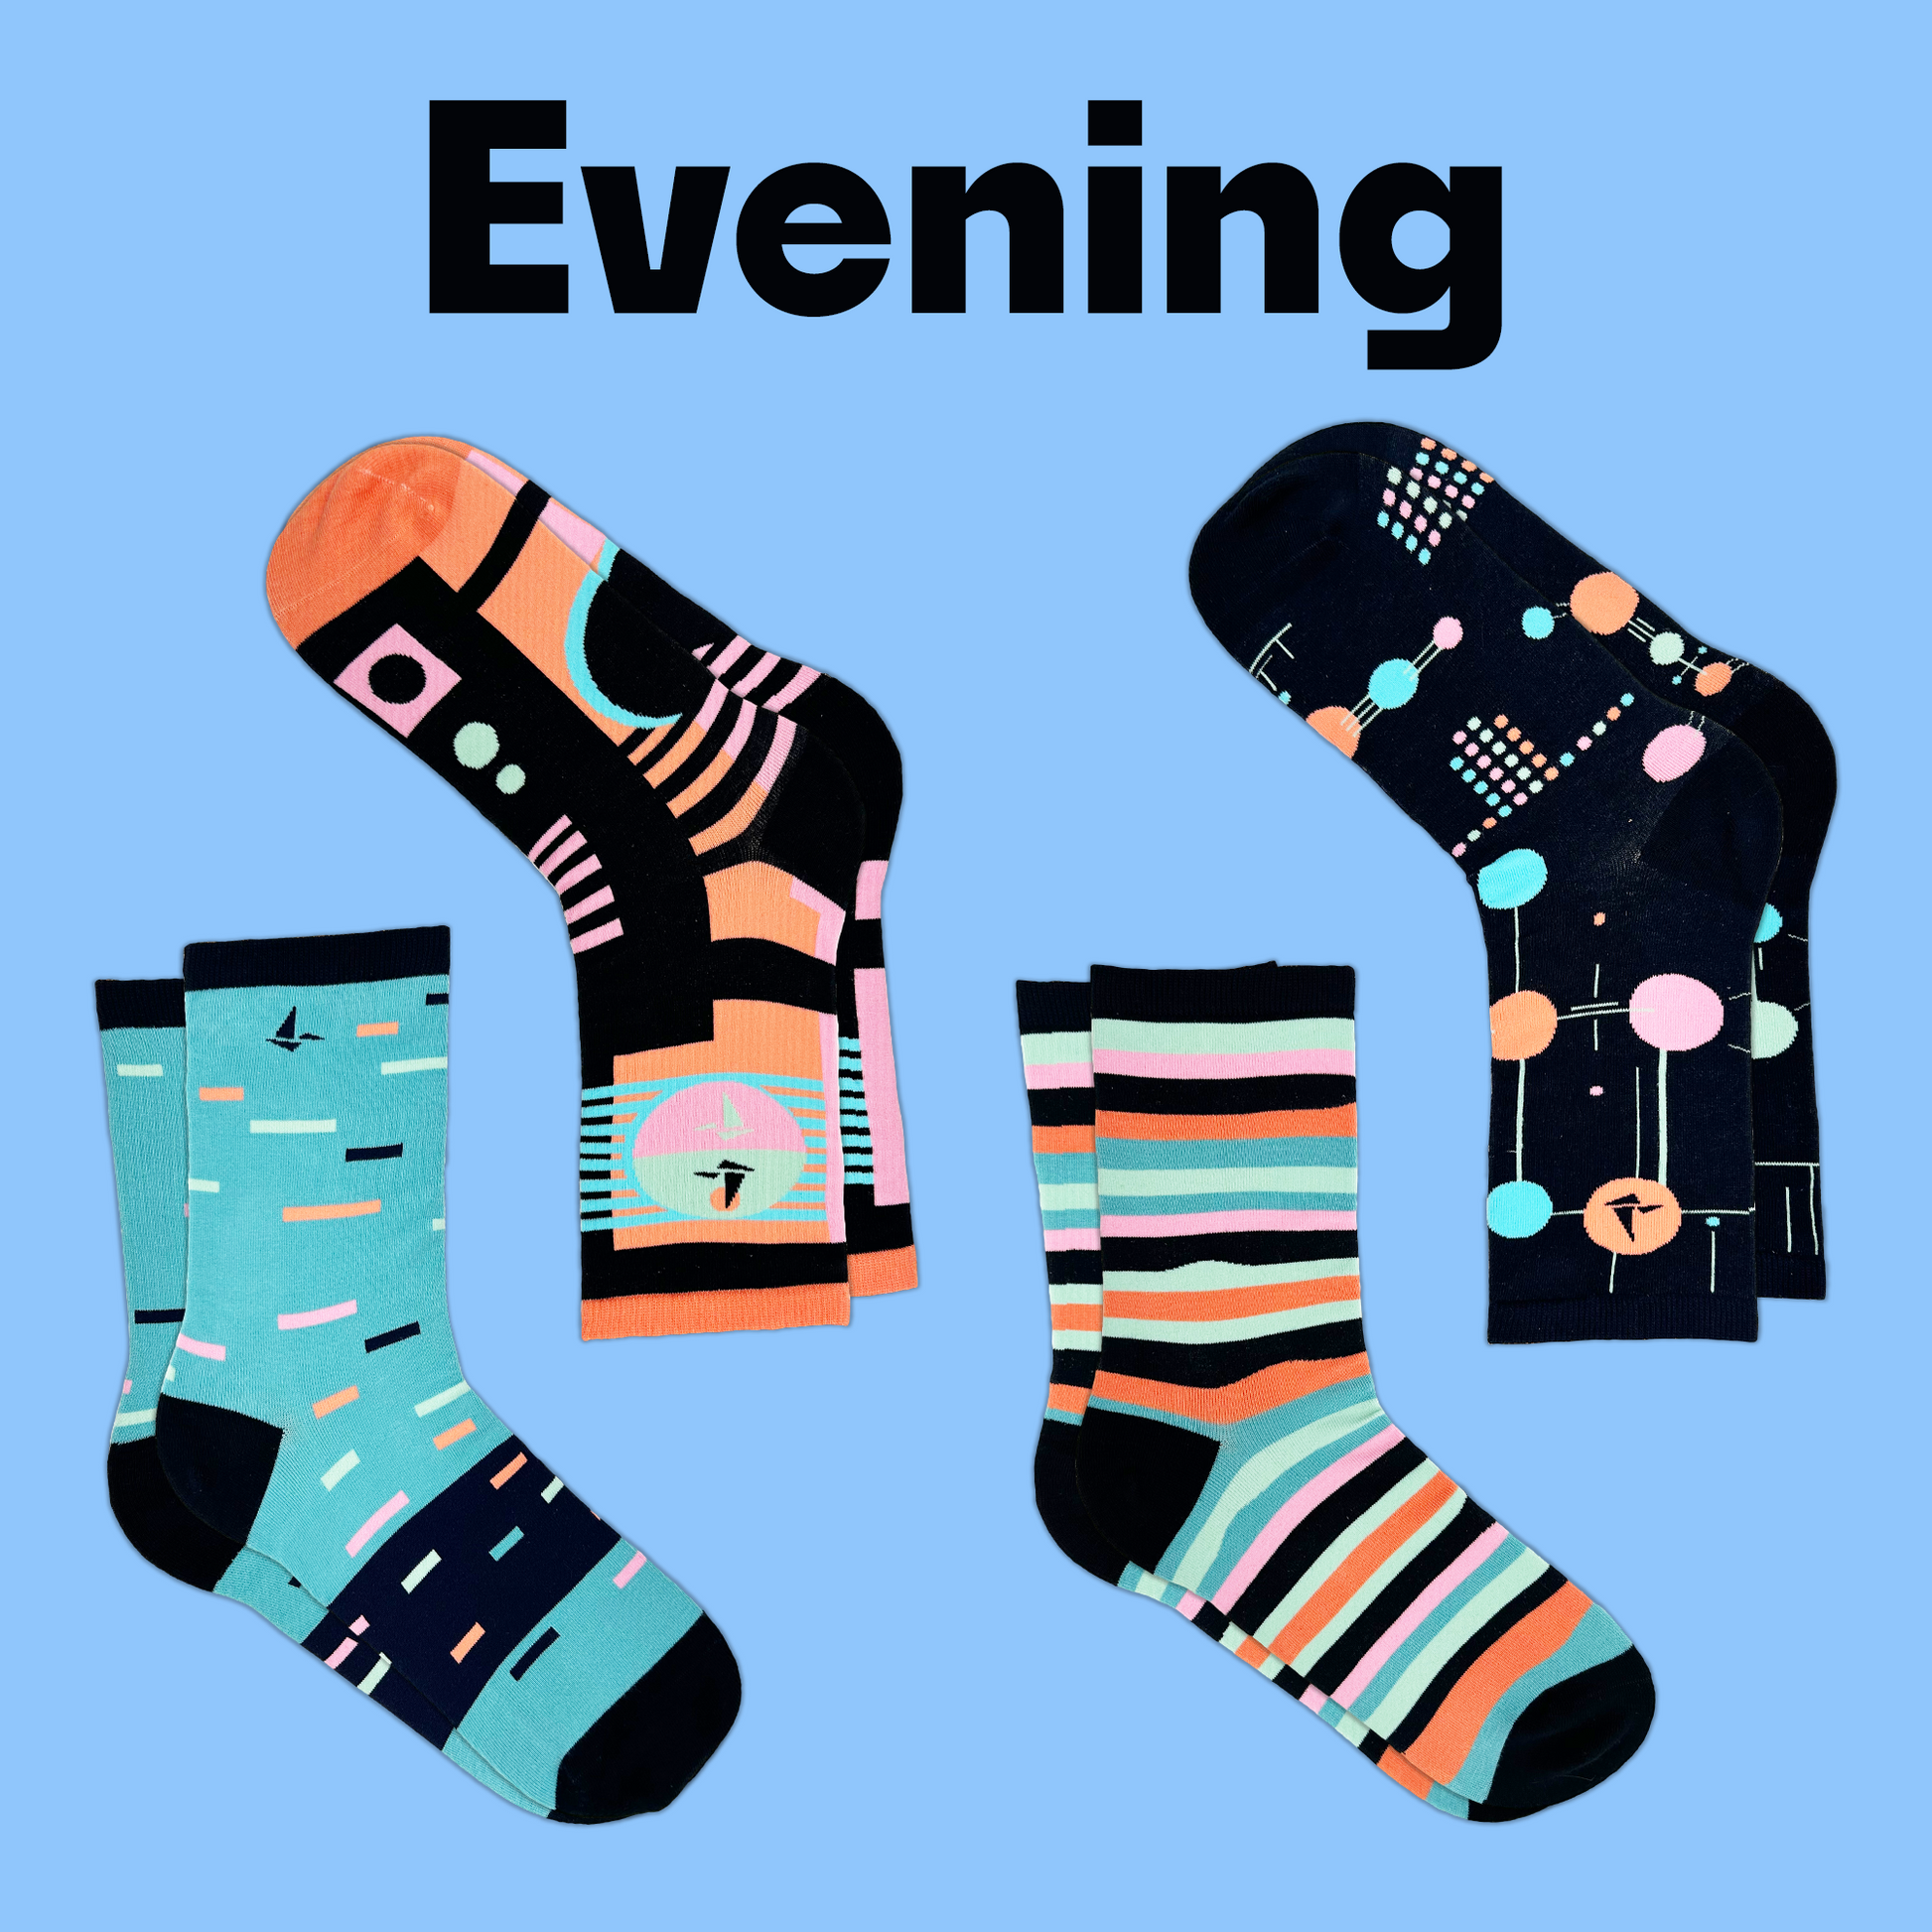 Four pairs of Hank's Cancer Socks in differing patterns with a similar color scheme lay in front of a light blue background with text that reads "Evening". An Awesome Socks Club product.